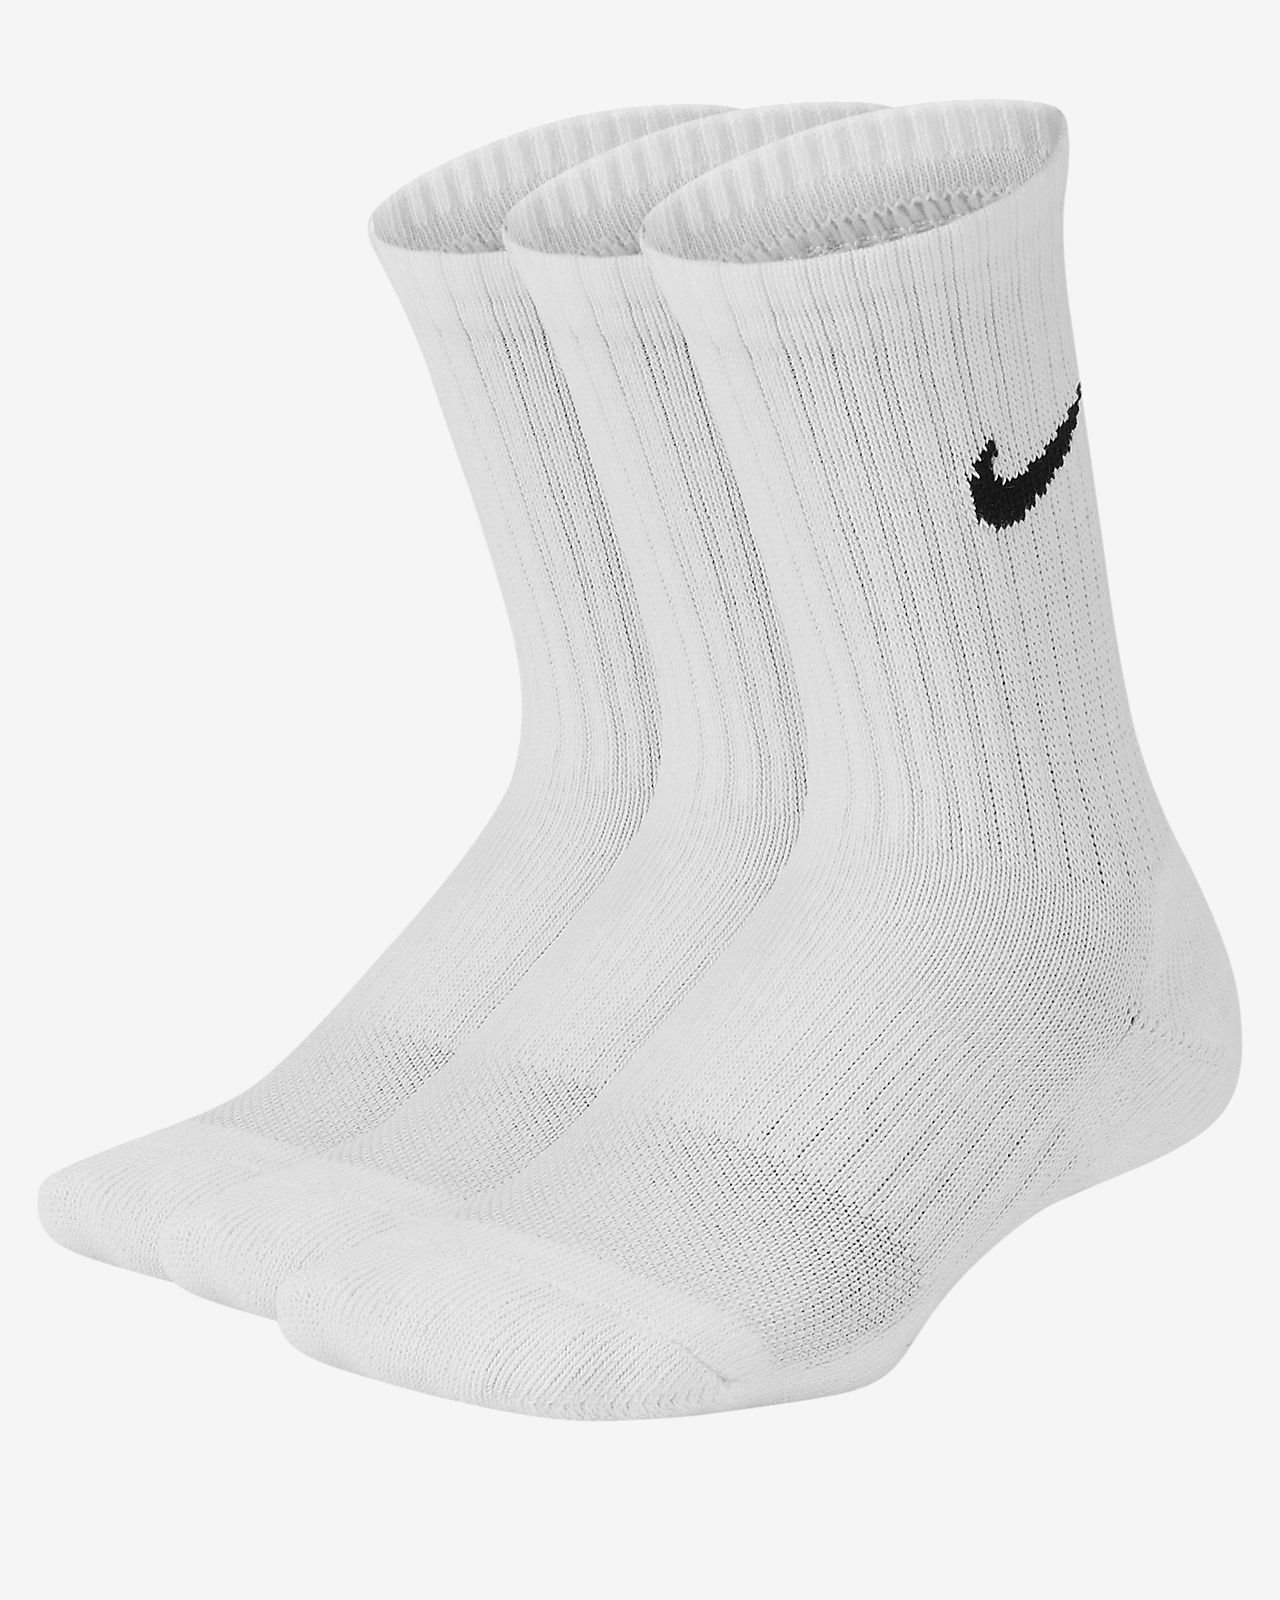 nike socks dri fit there are more brands of high-quality goods